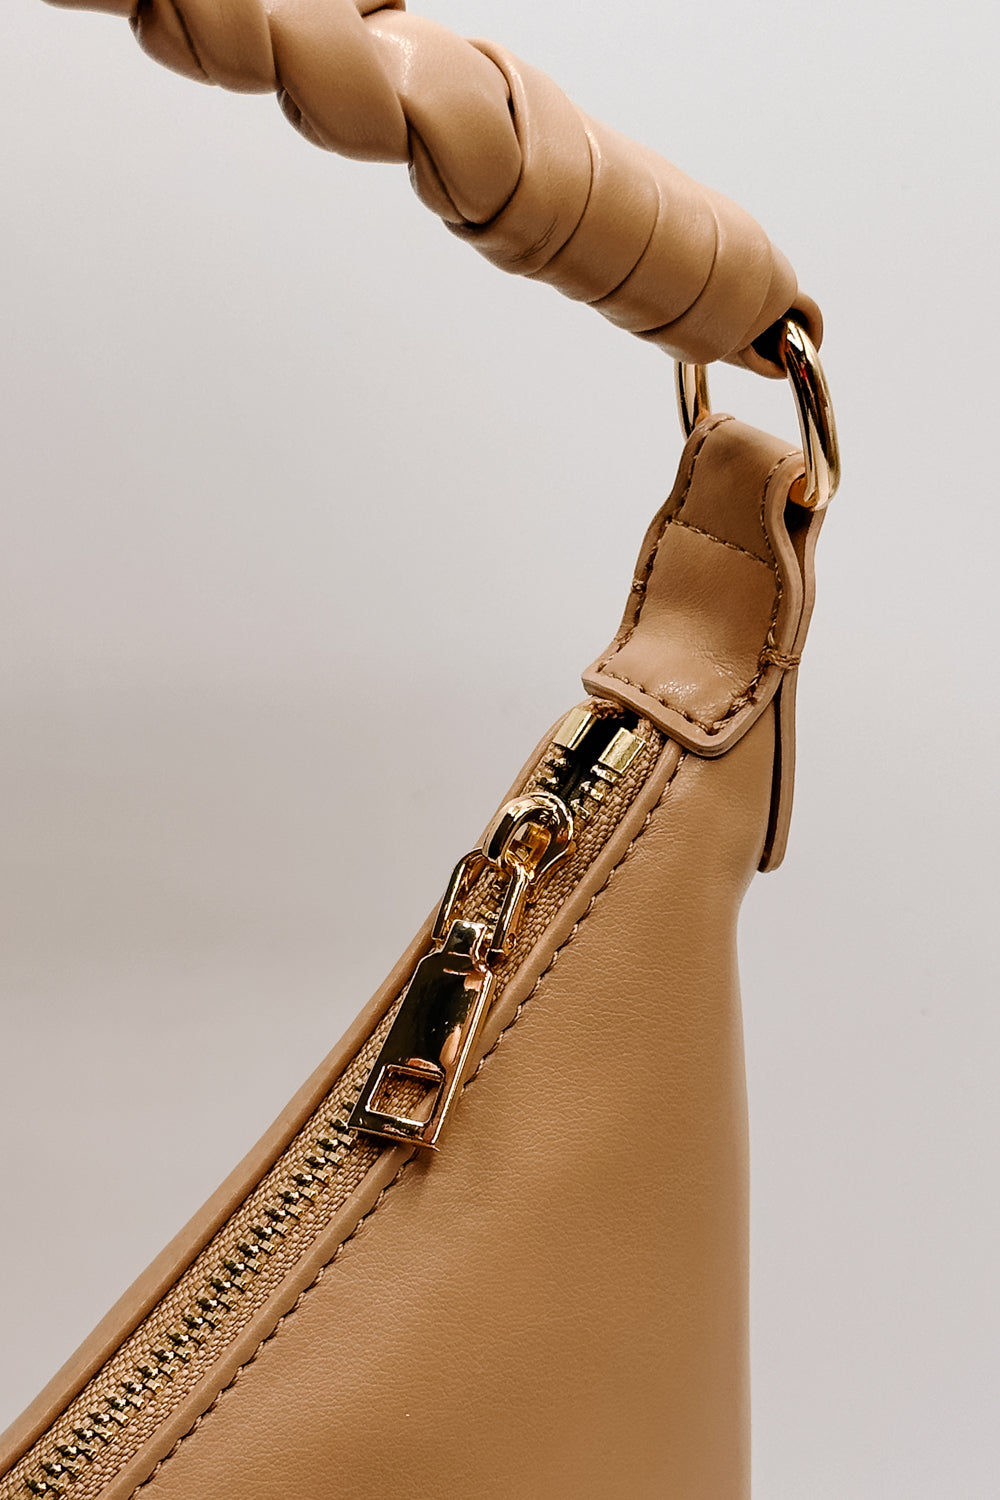 close up view of the Taylor Natural Leather Braided Strap Purse which features light brown leather fabric, gold zipper closure, gold hardware details, braided strap and herringbone lining